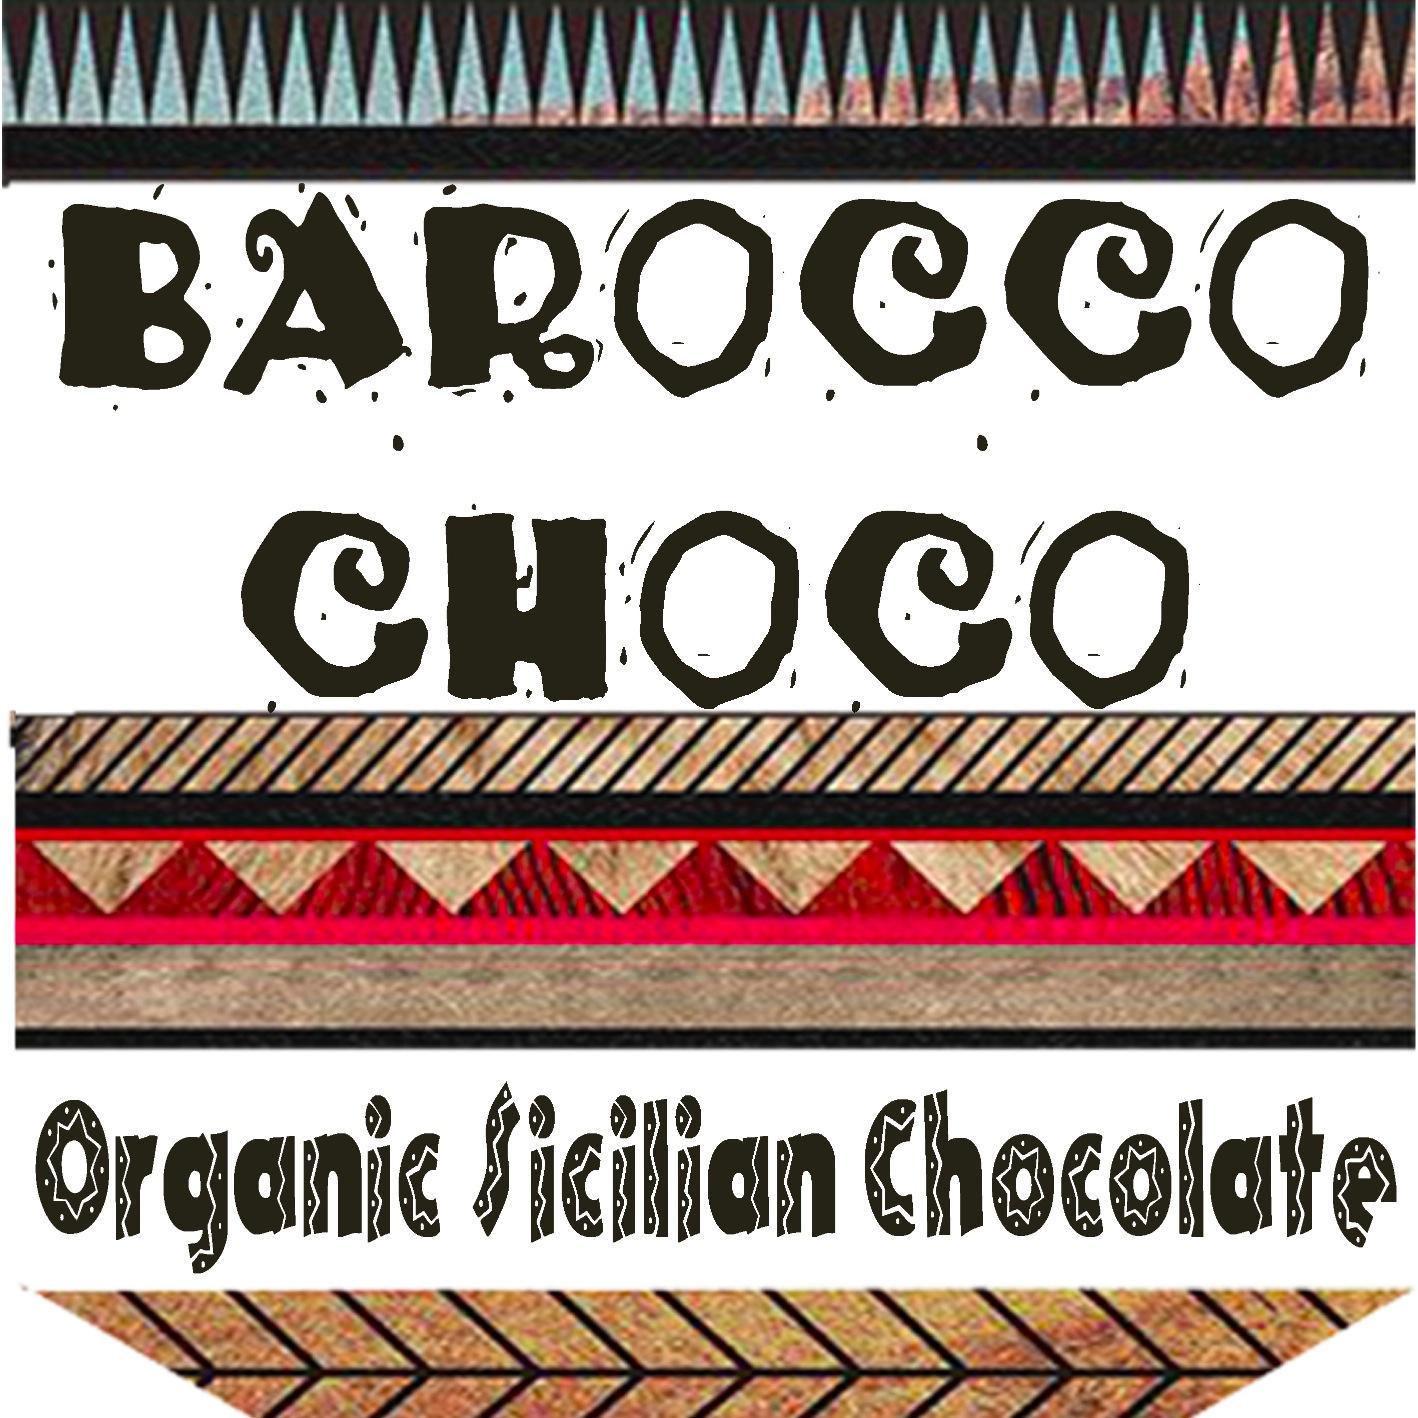 Barocco Choco is a Sicilian organic, fair-trade & vegan chocolate range that is inspired by an ancient Aztec recipe.